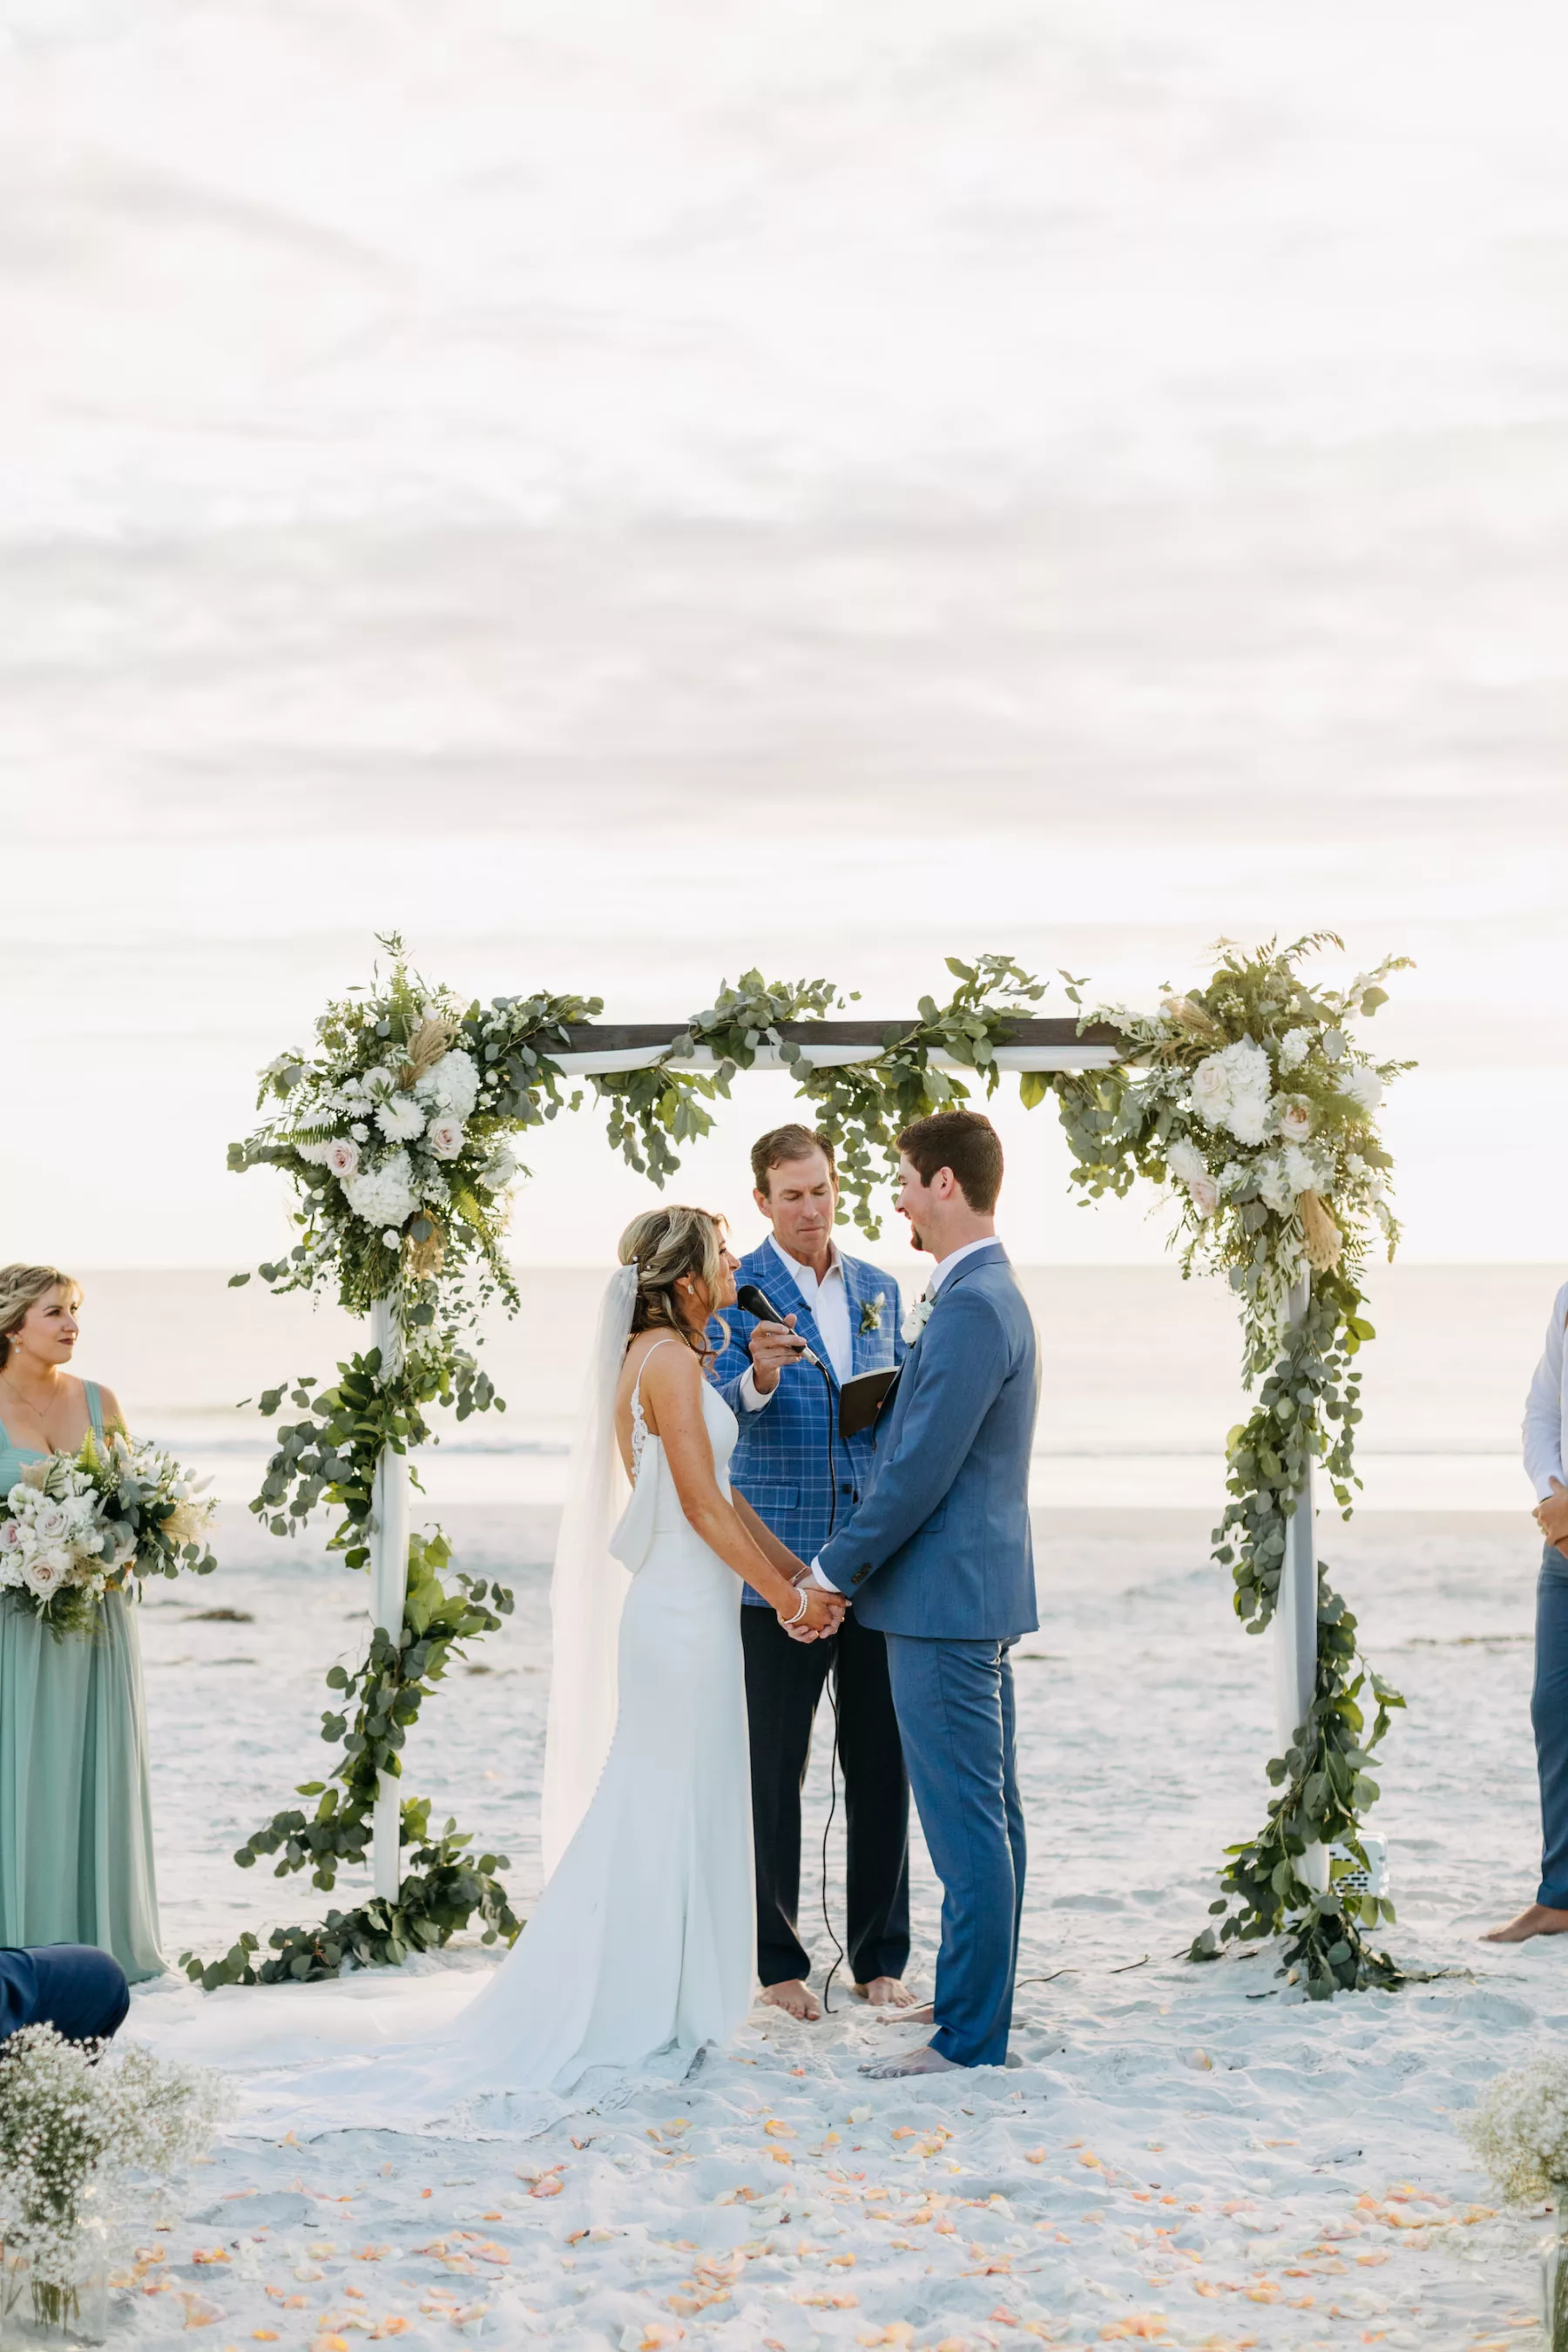 White Arbor with Wrapped Greenery Garland and White Roses for Fall Boho Beach Wedding Decor Ideas